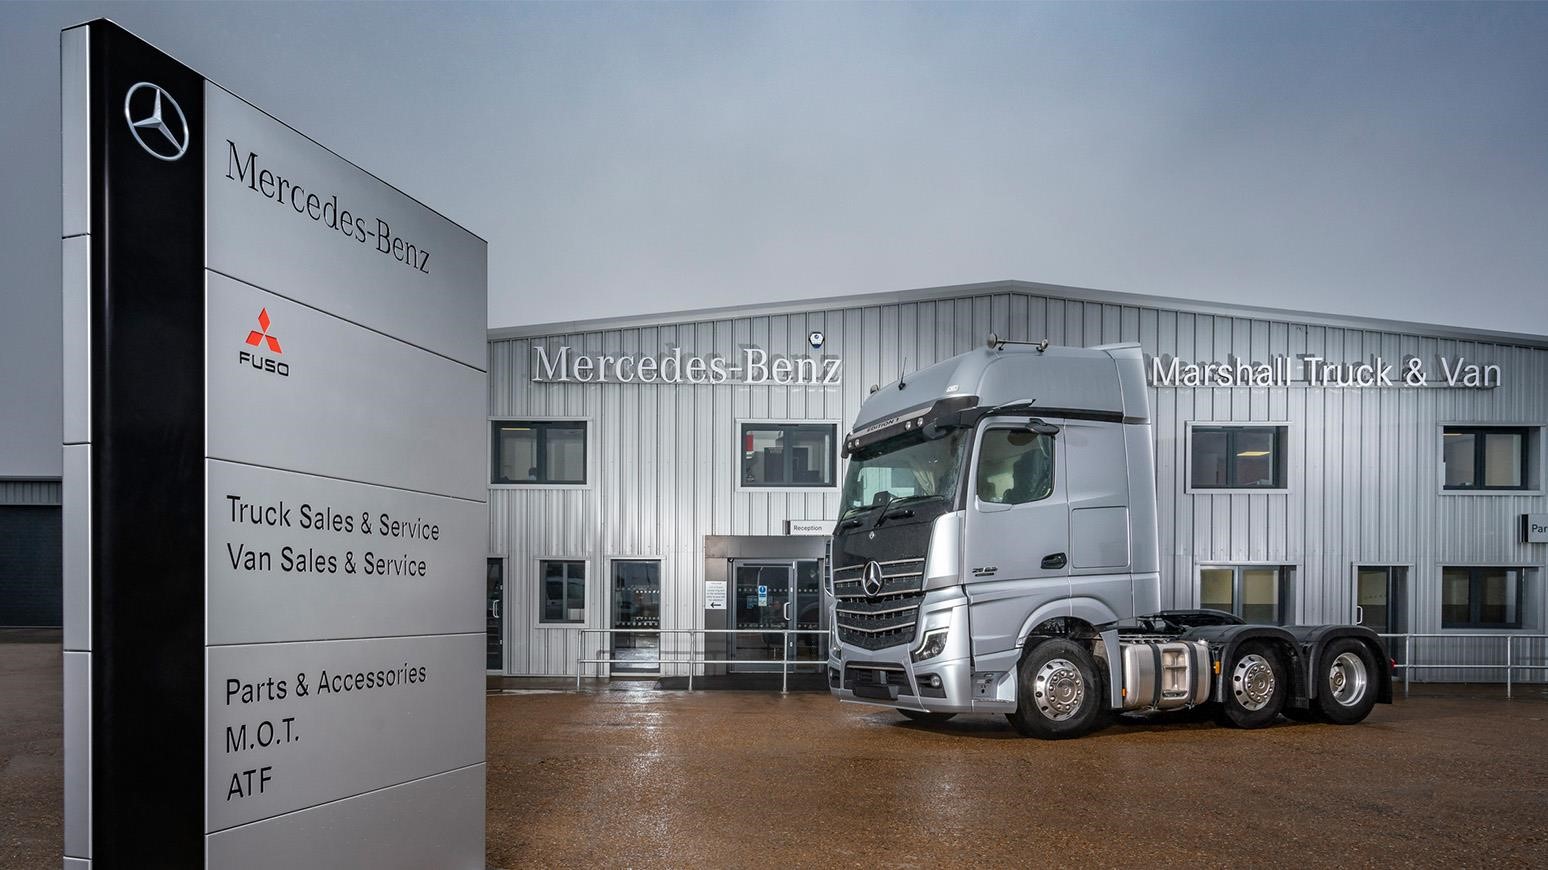 Mercedes-Benz Dealer Marshall Truck & Van Introduces New Head Of Business, Opens New Dealership In Southampton